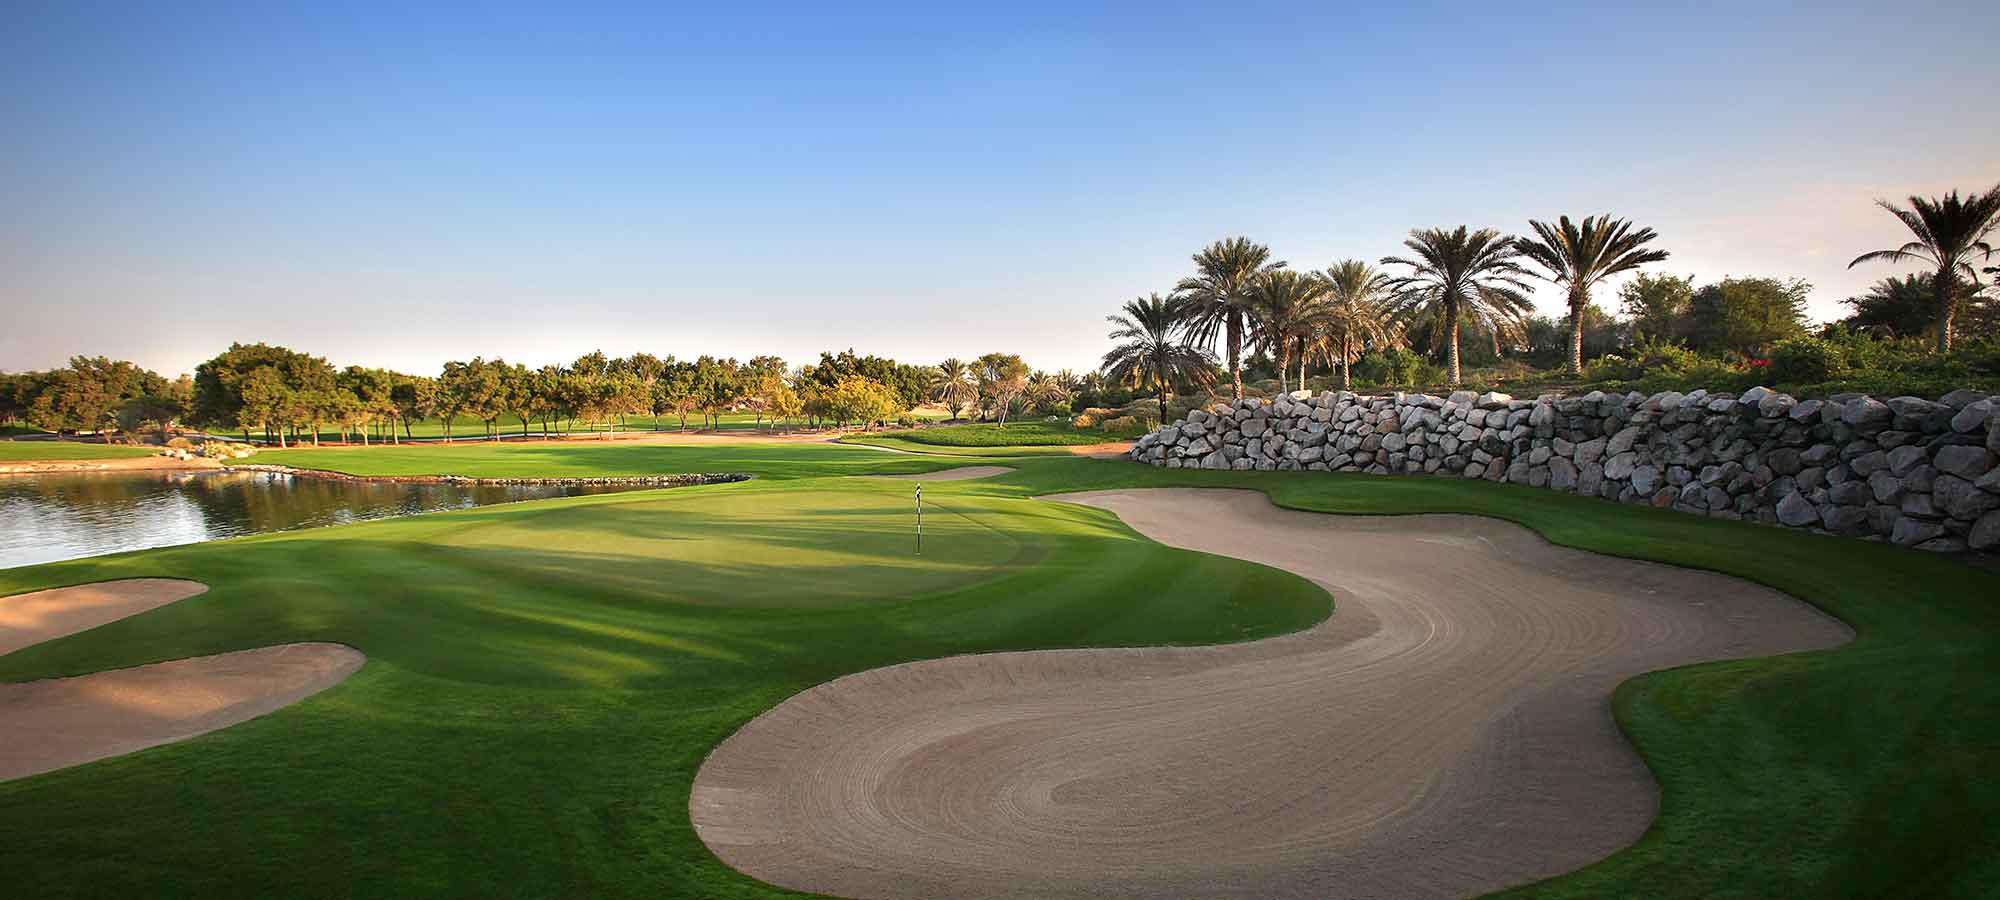 6 Reasons to Visit Abu Dhabi for a Golf Holiday